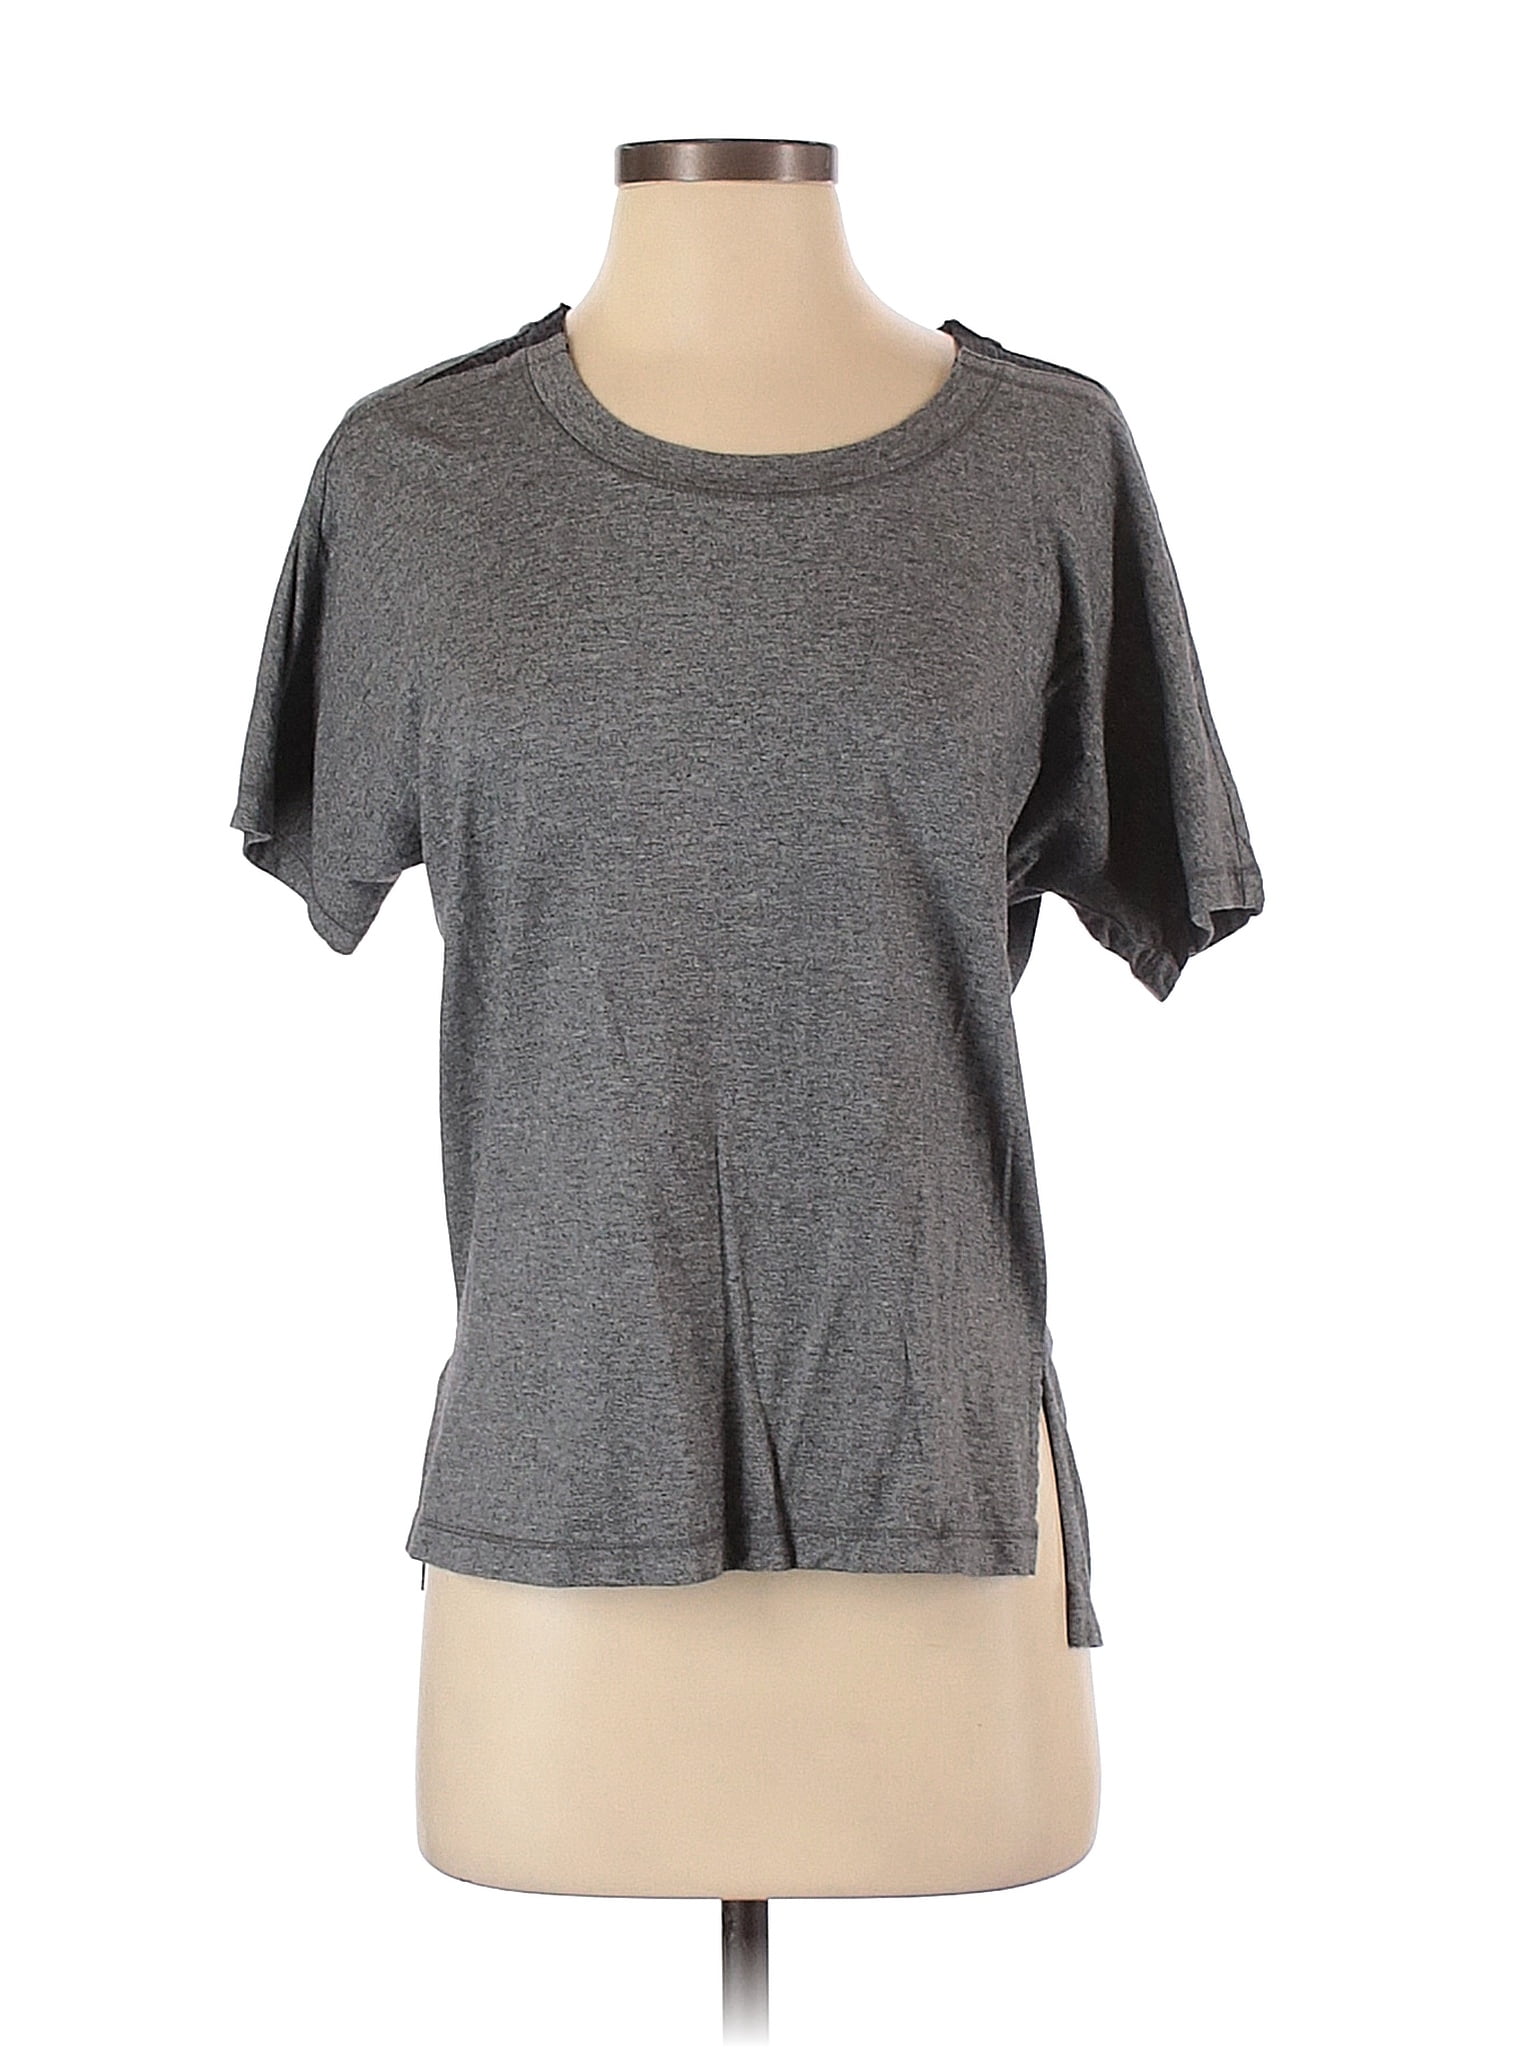 Calia by Carrie Underwood Gray Active T-Shirt Size XS - 60% off | thredUP